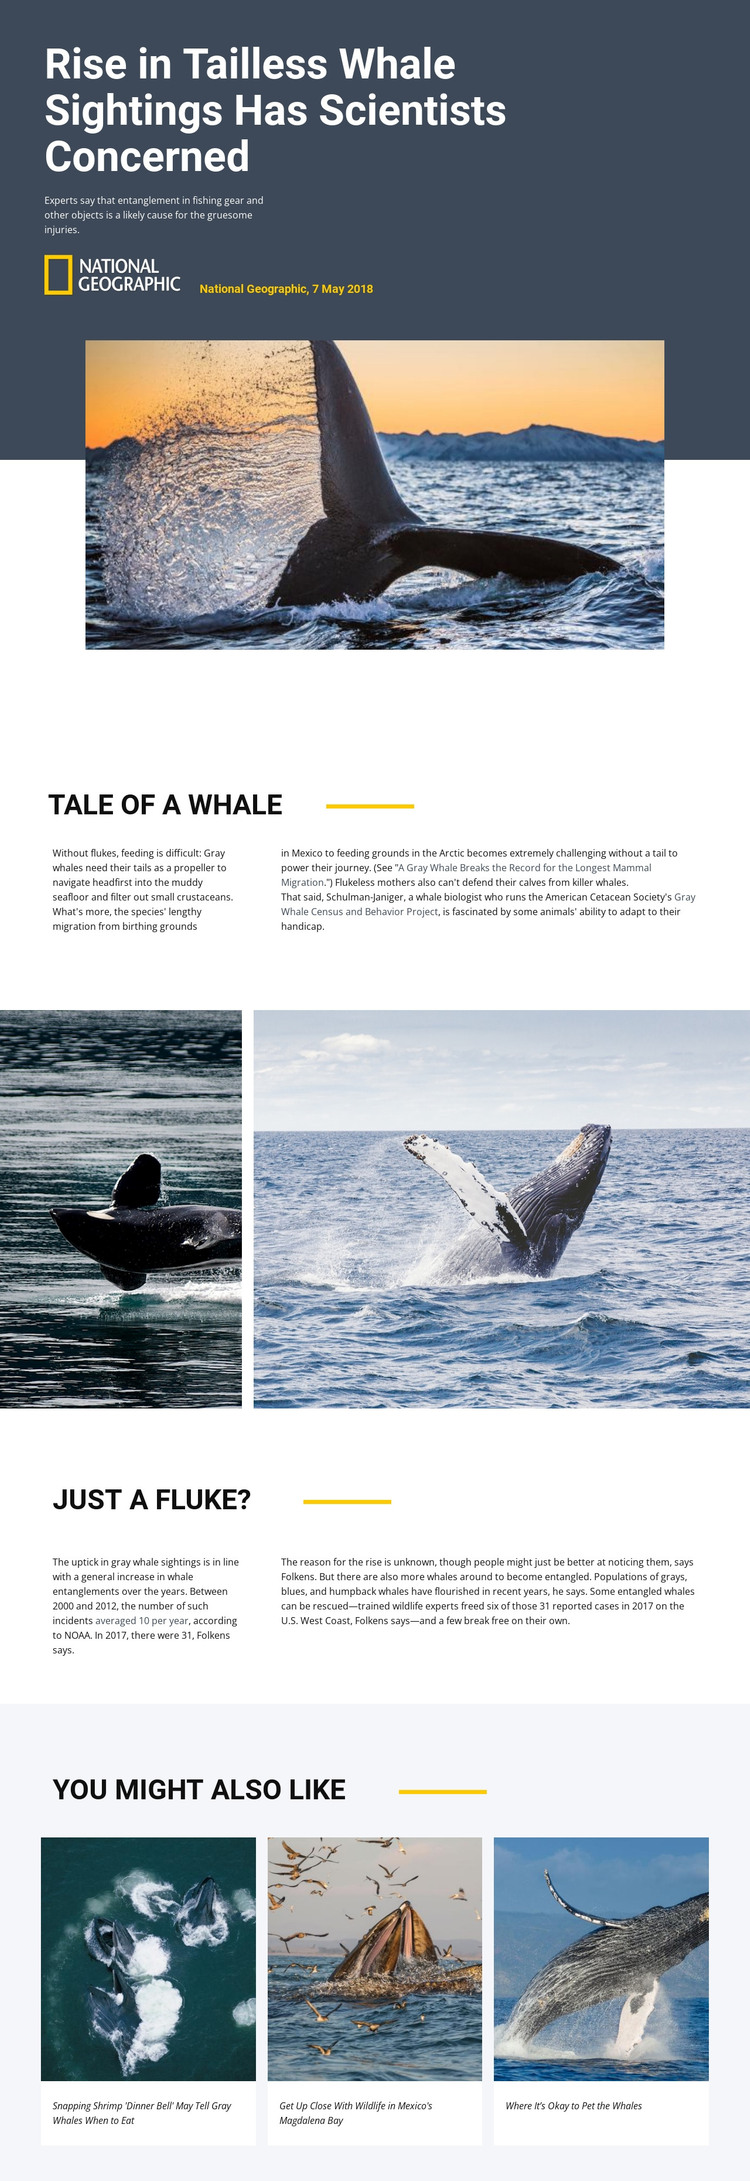 Whale watching center Web Design